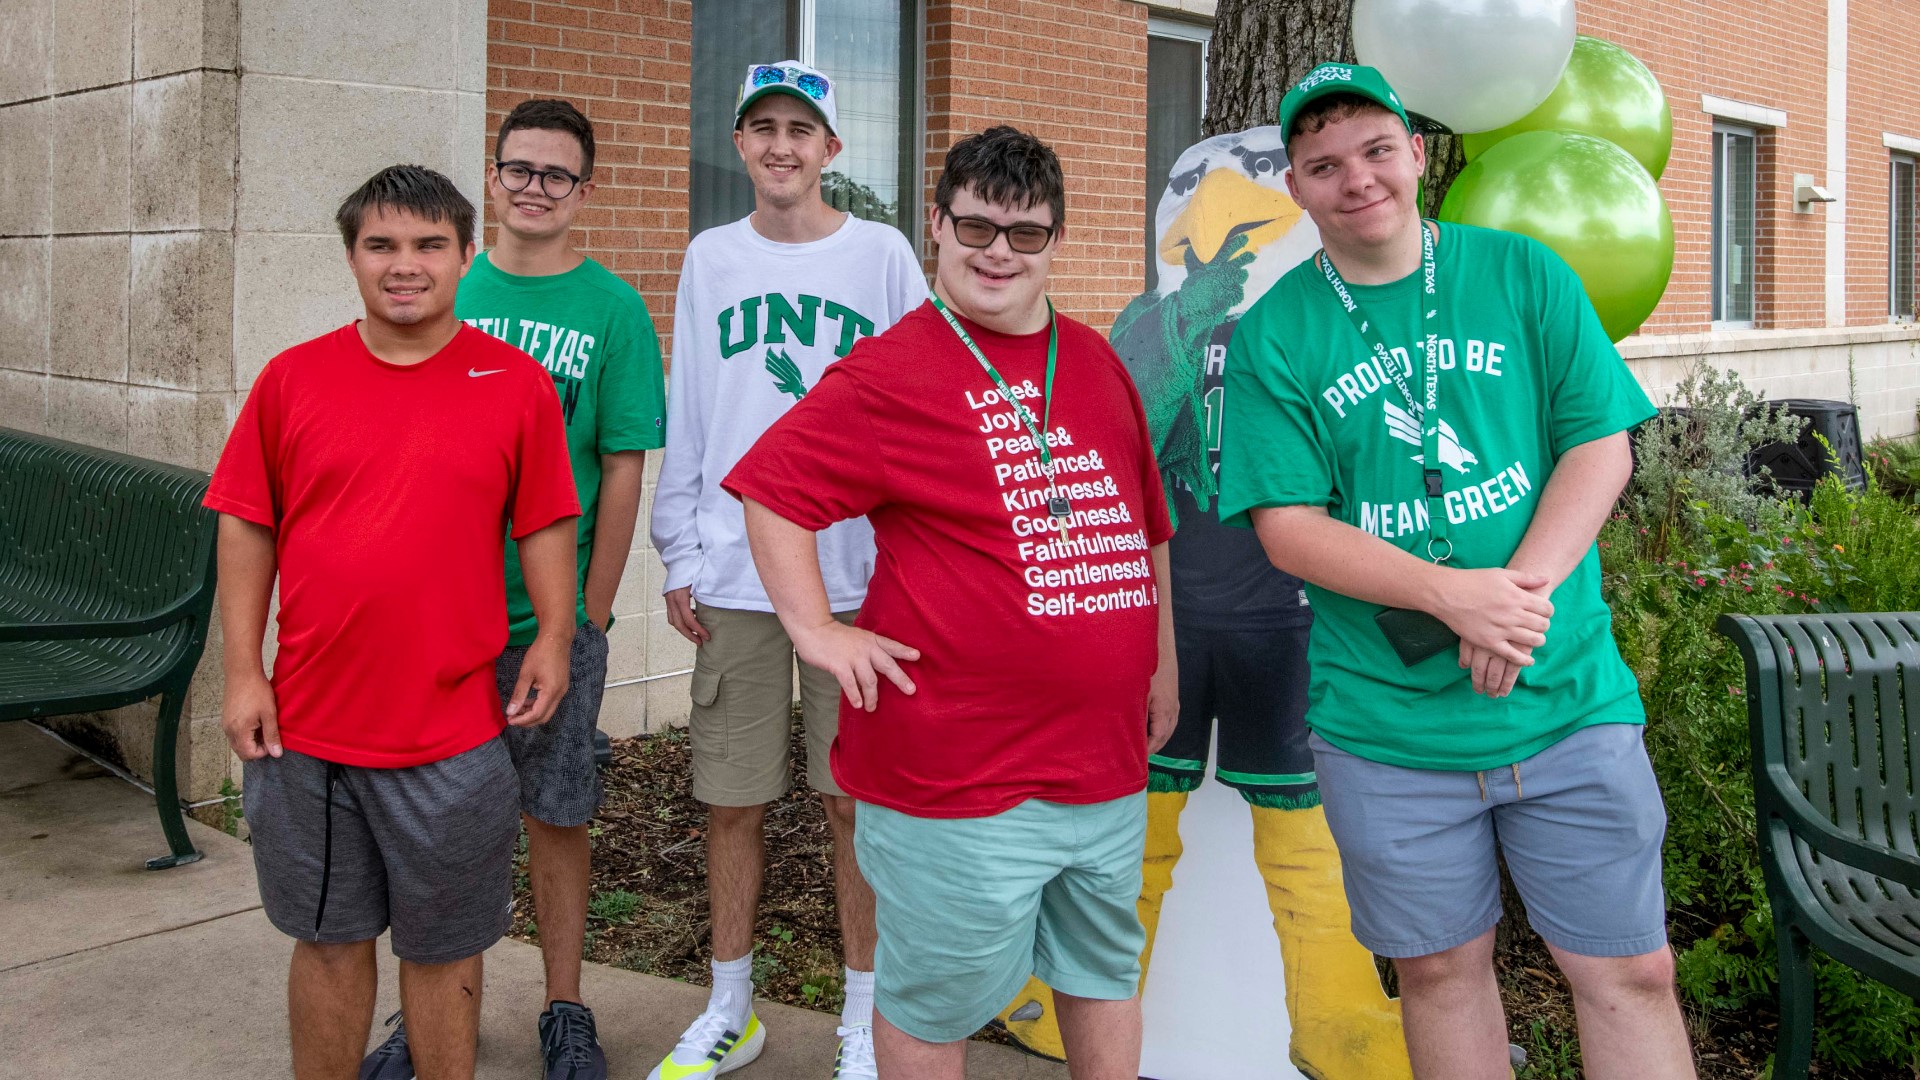 UNT ELEVAR is a four-year inclusive postsecondary education program for students with intellectual disabilities - the first of its kind in North Texas.